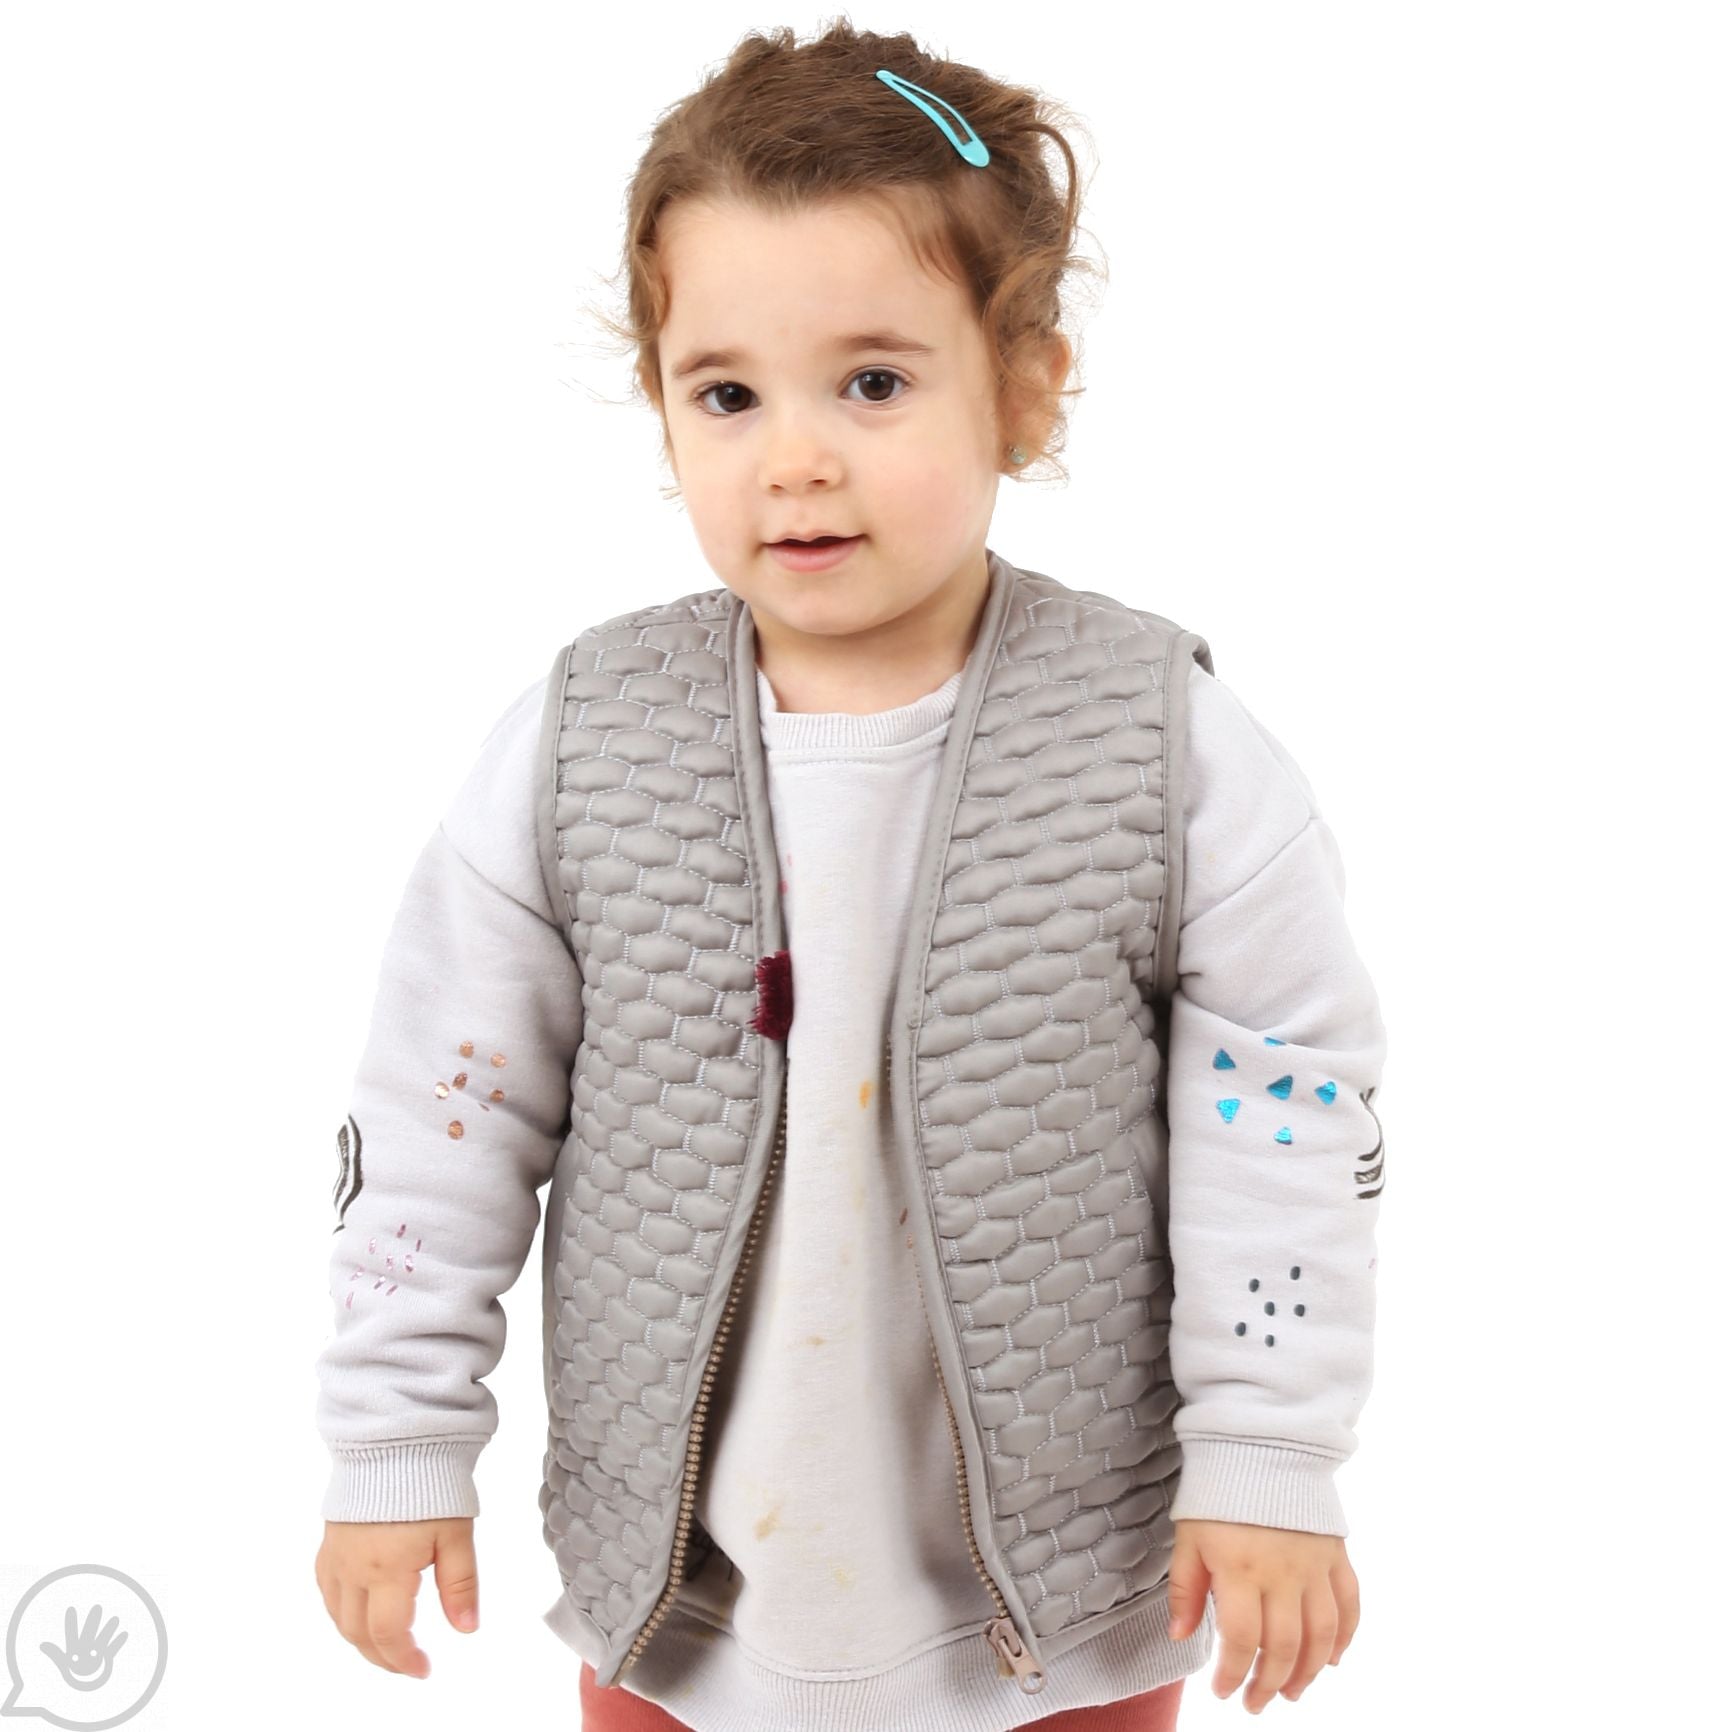 A child with light skin tone and brown hair wears the Kids Honeycomb Weighted Vest over a beige sweatshirt.